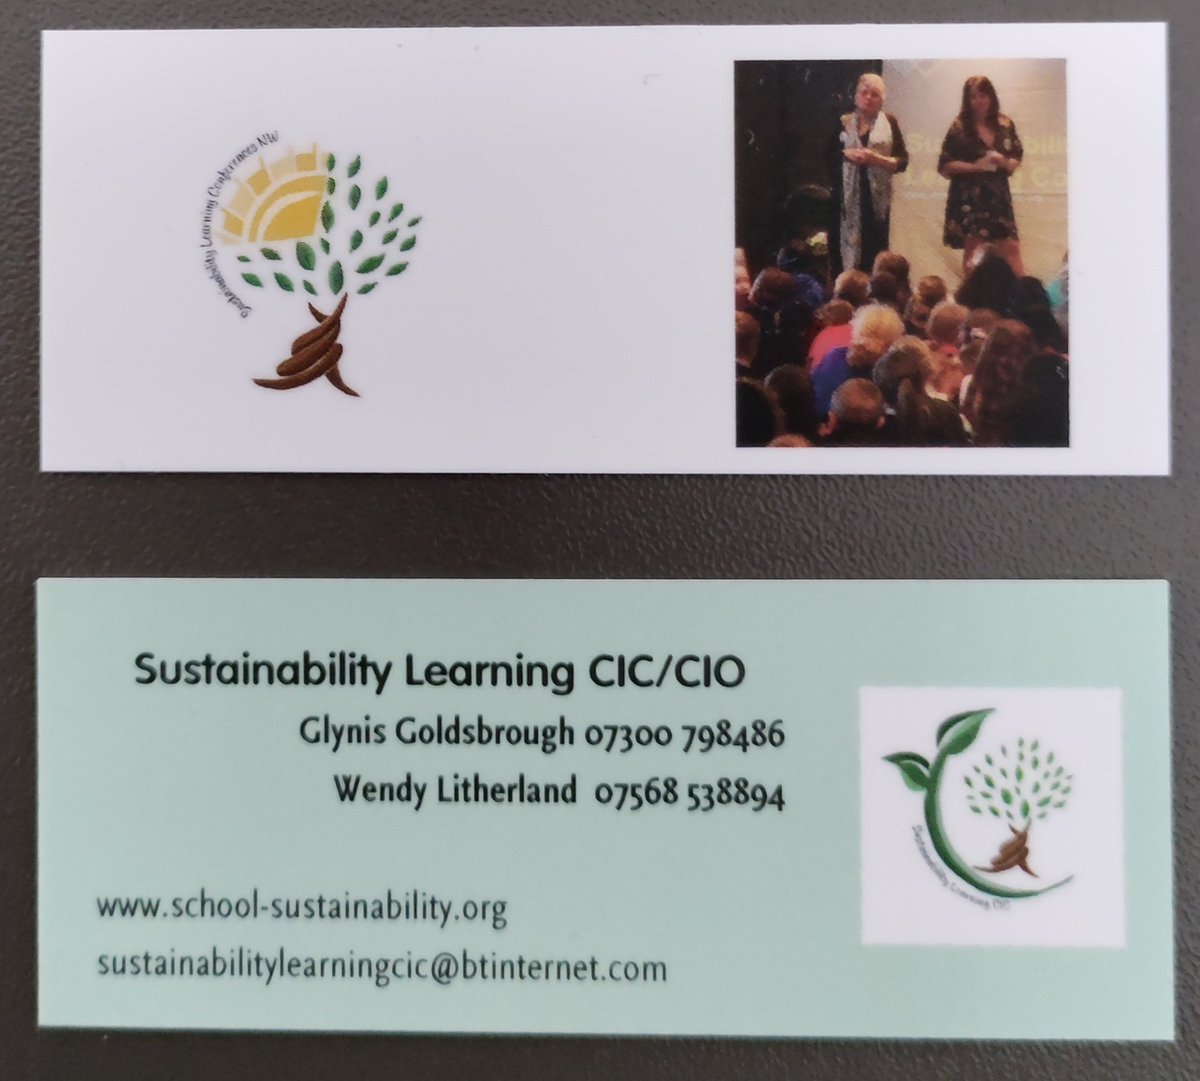 Excited to see myself on the new business cards for #SLC24 but not as excited as I am for the conference itself on 27th June 2024. Great meeting to share ideas with @CICNWconf @Sch_ESD_Conf 
Watch this space for my new book 💚